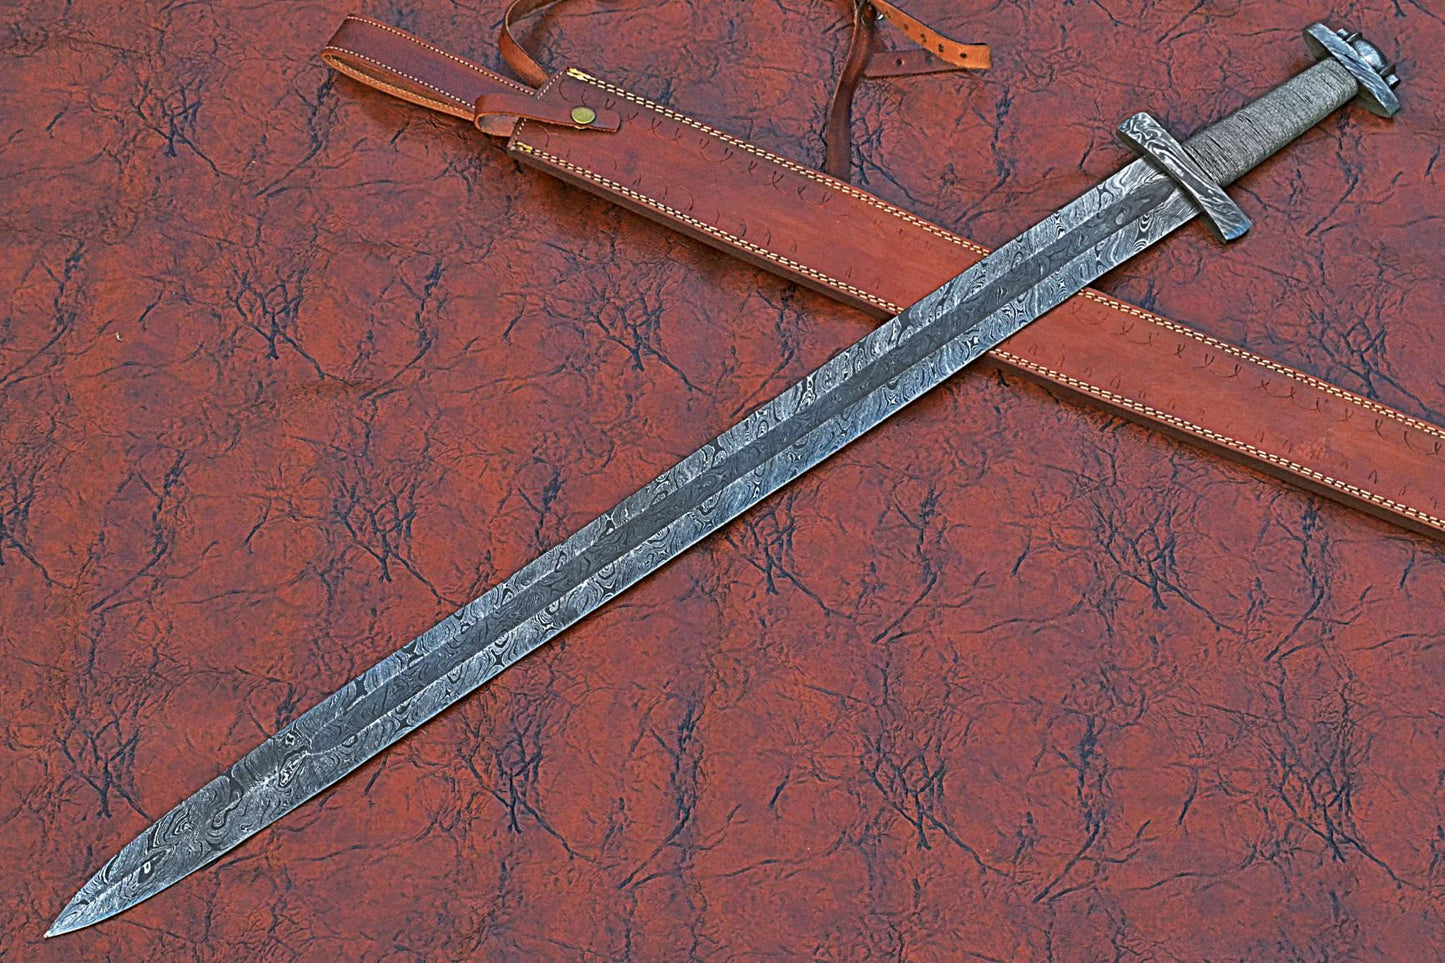 38 inches long Gladius sword, 31" long Hand forged Damascus steel double edge blade, Solid Damascus steel cross guard and pommel, Matching color thread wrap grip, Leather scabbard with shoulder stripe